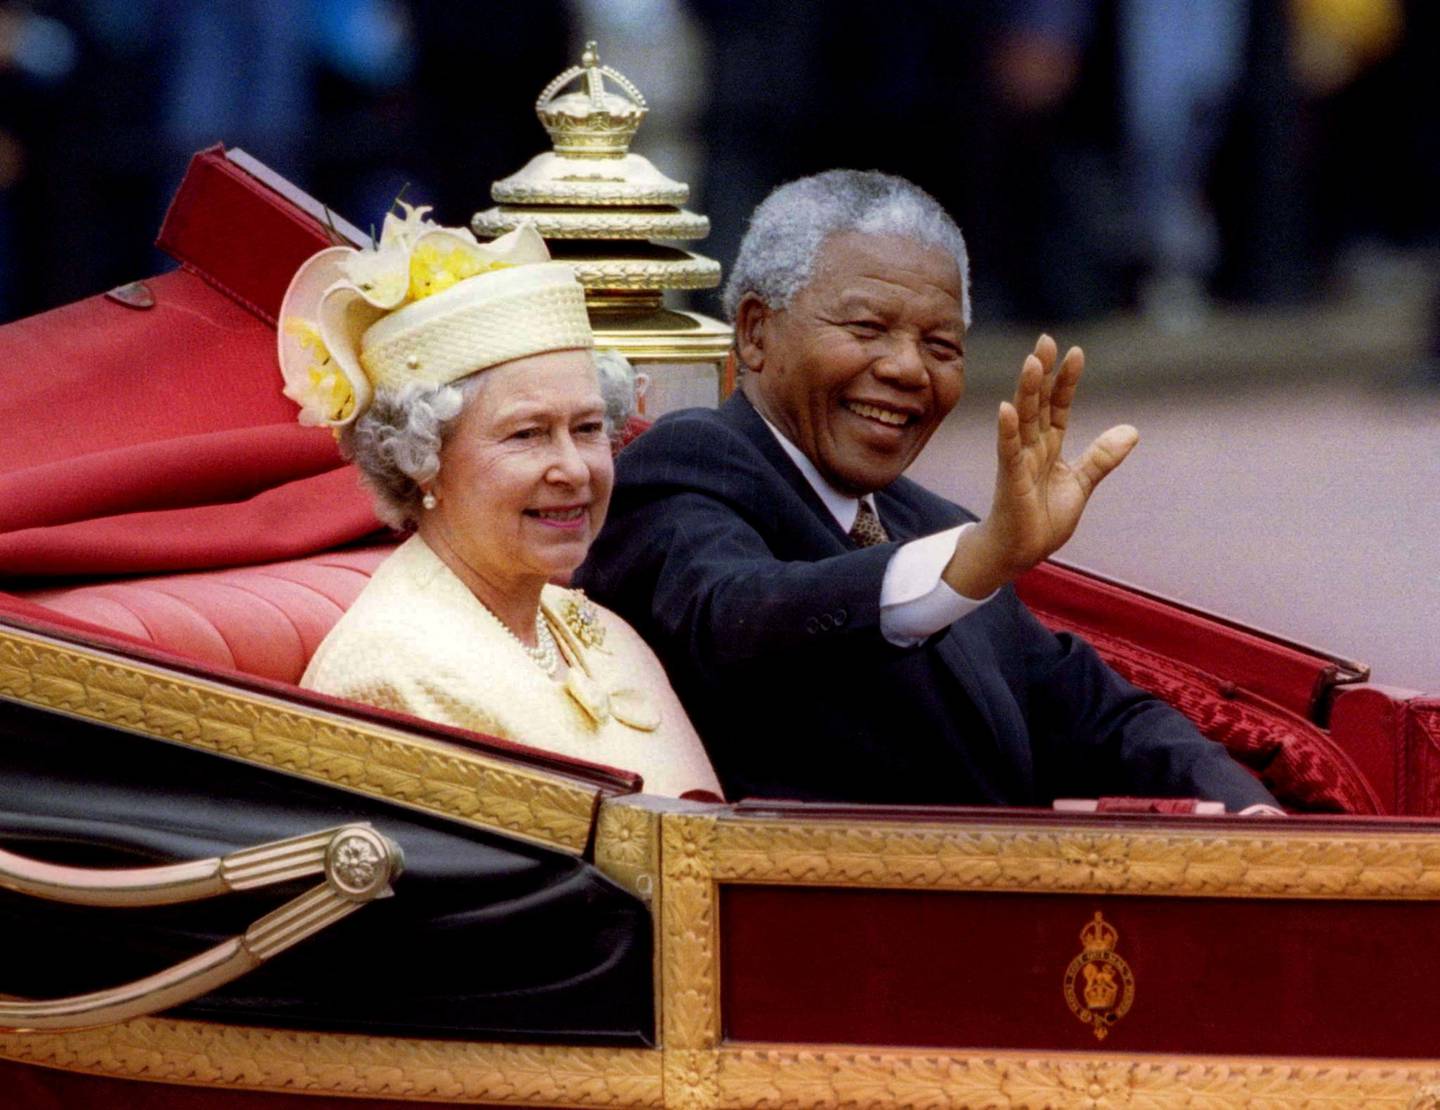 Nelson Mandela, the then president of South Africa, rides in a horse-drawn carriage with Queen Elizabeth II in London during a state visit in 1996. Reuters 

